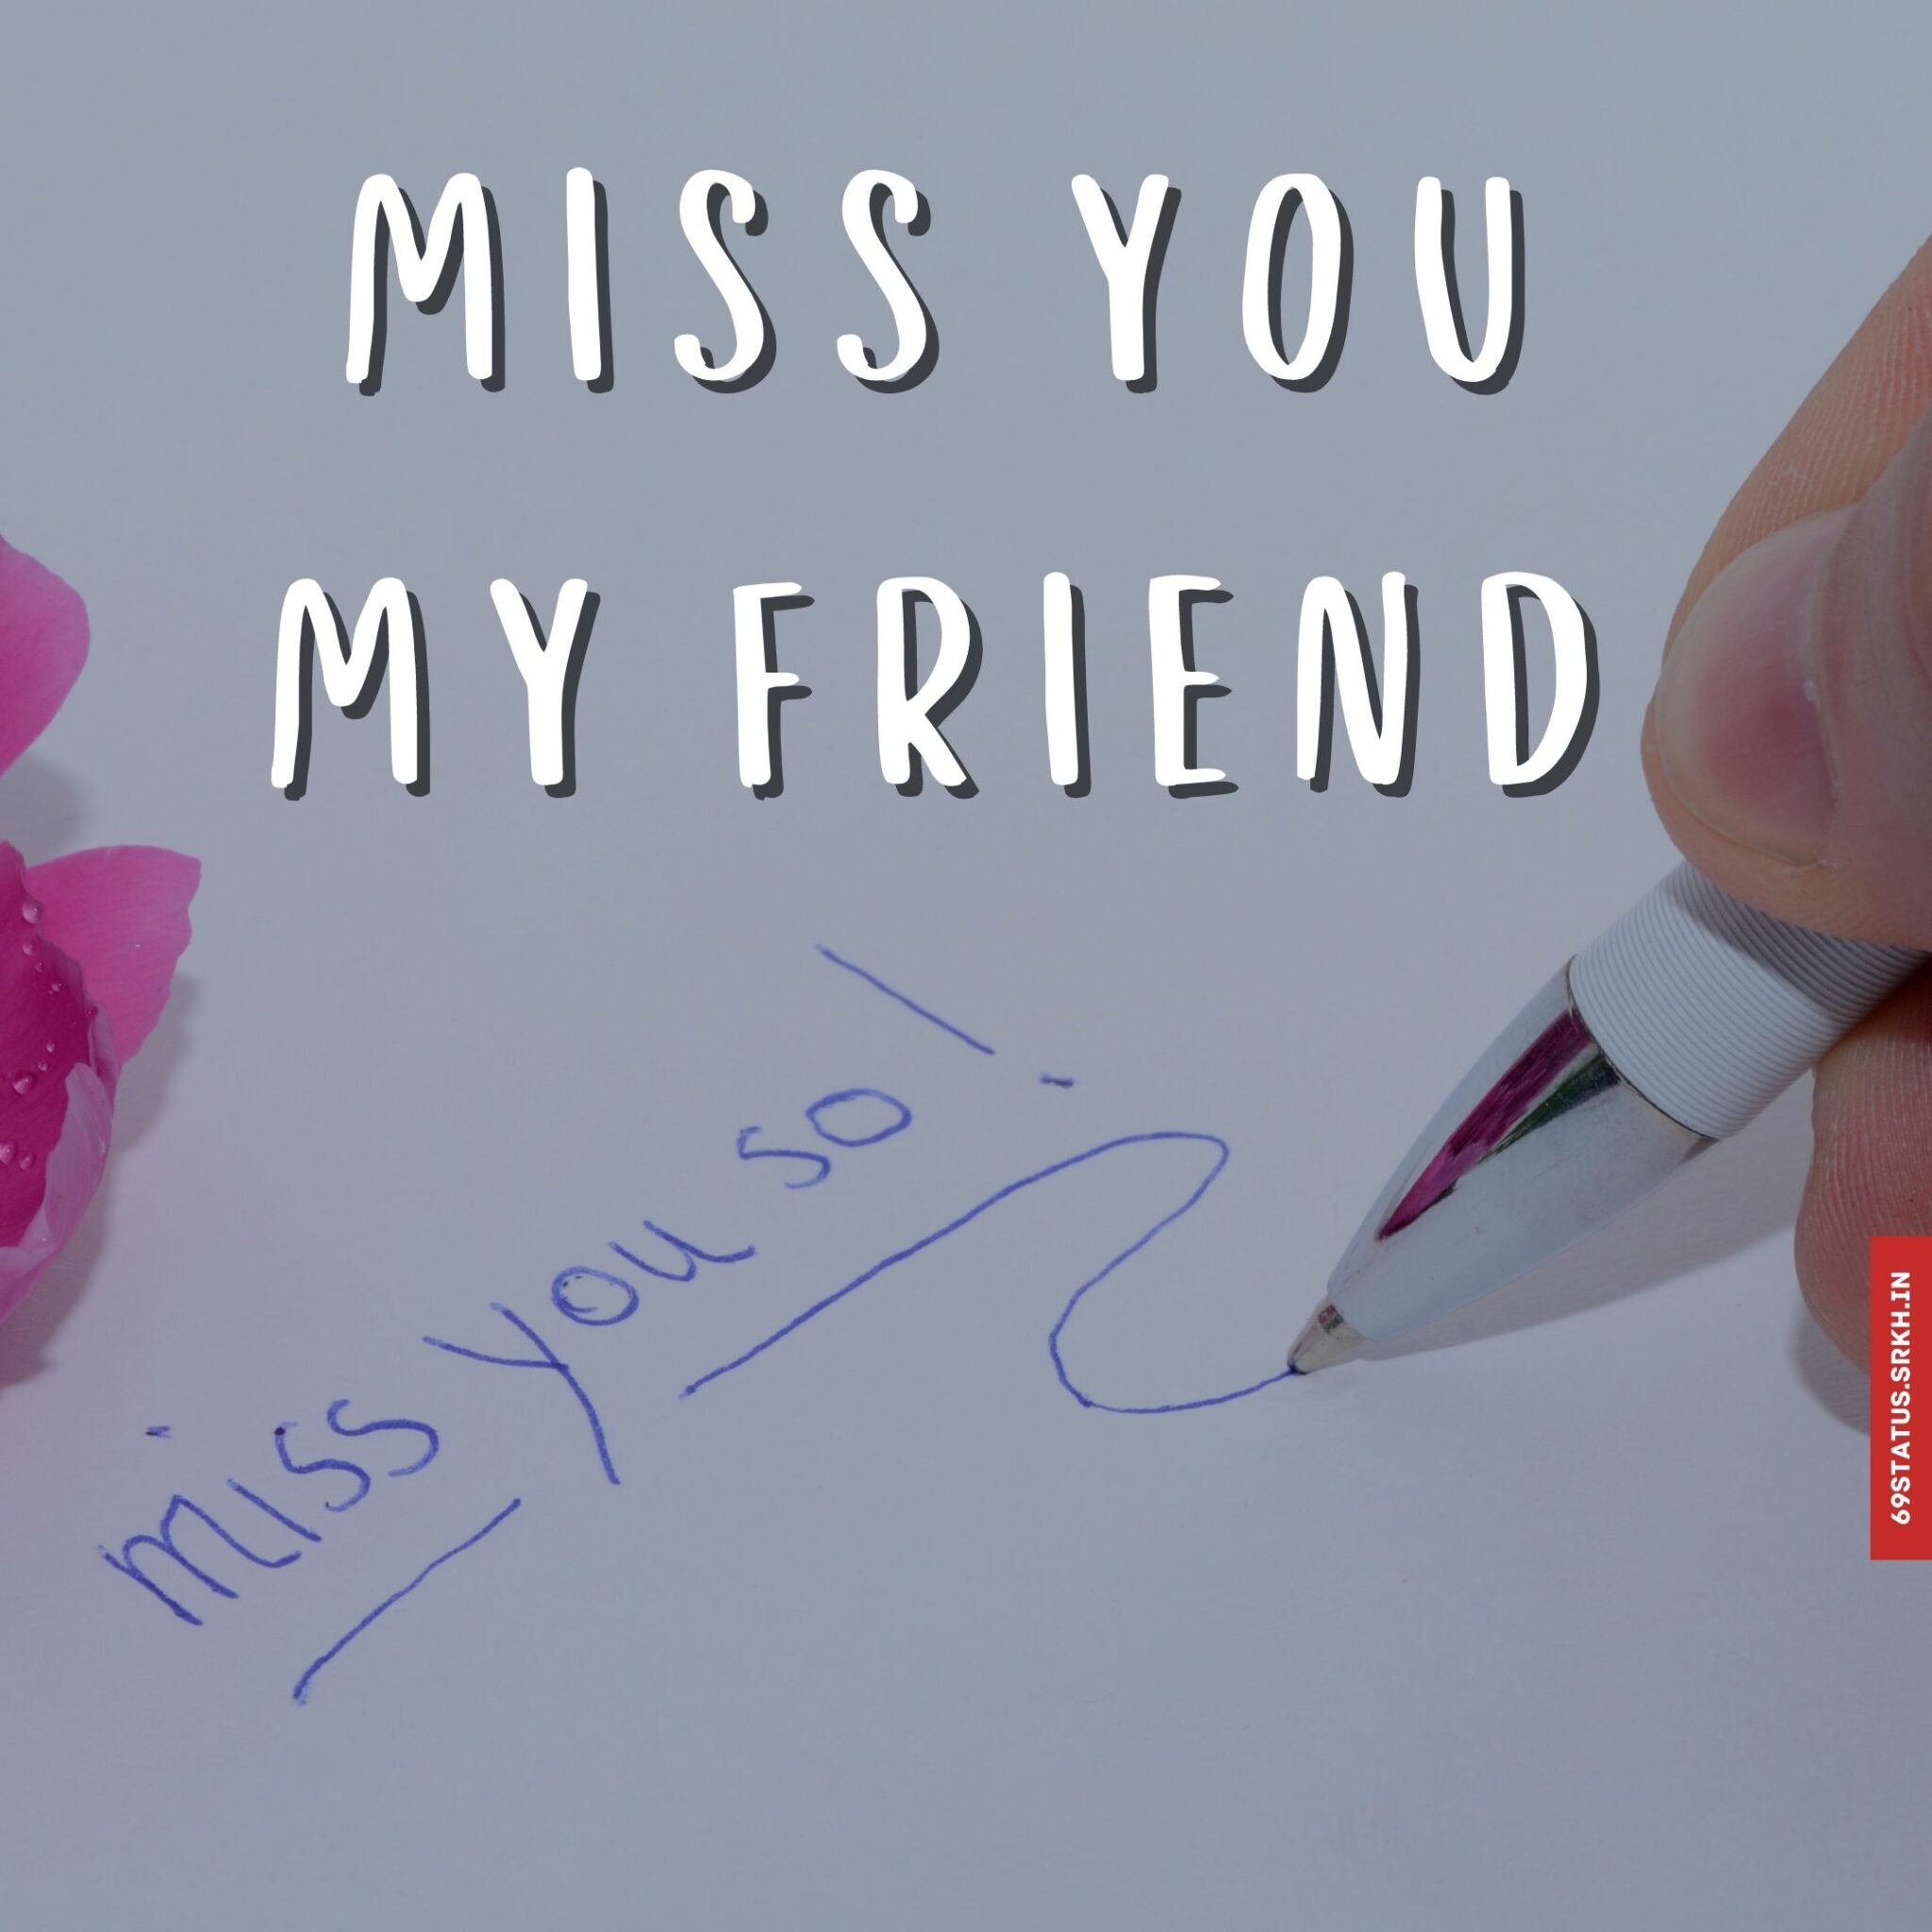 🔥 I miss you my friend images Download free - Images SRkh